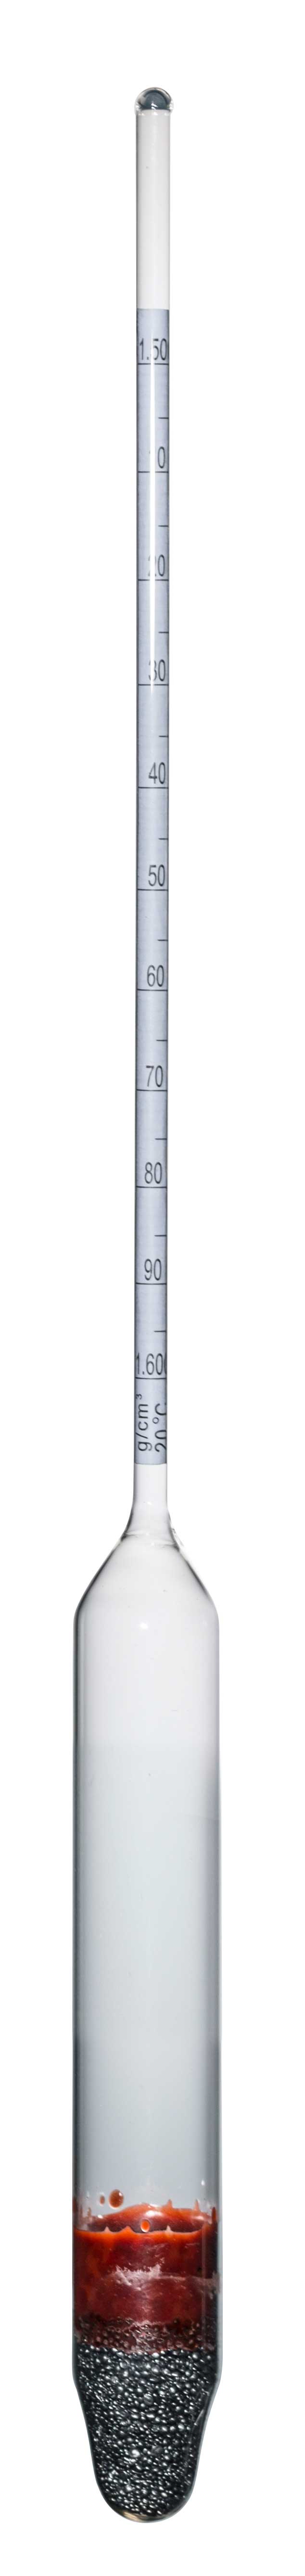 Hydrometers accuracy as ASTM